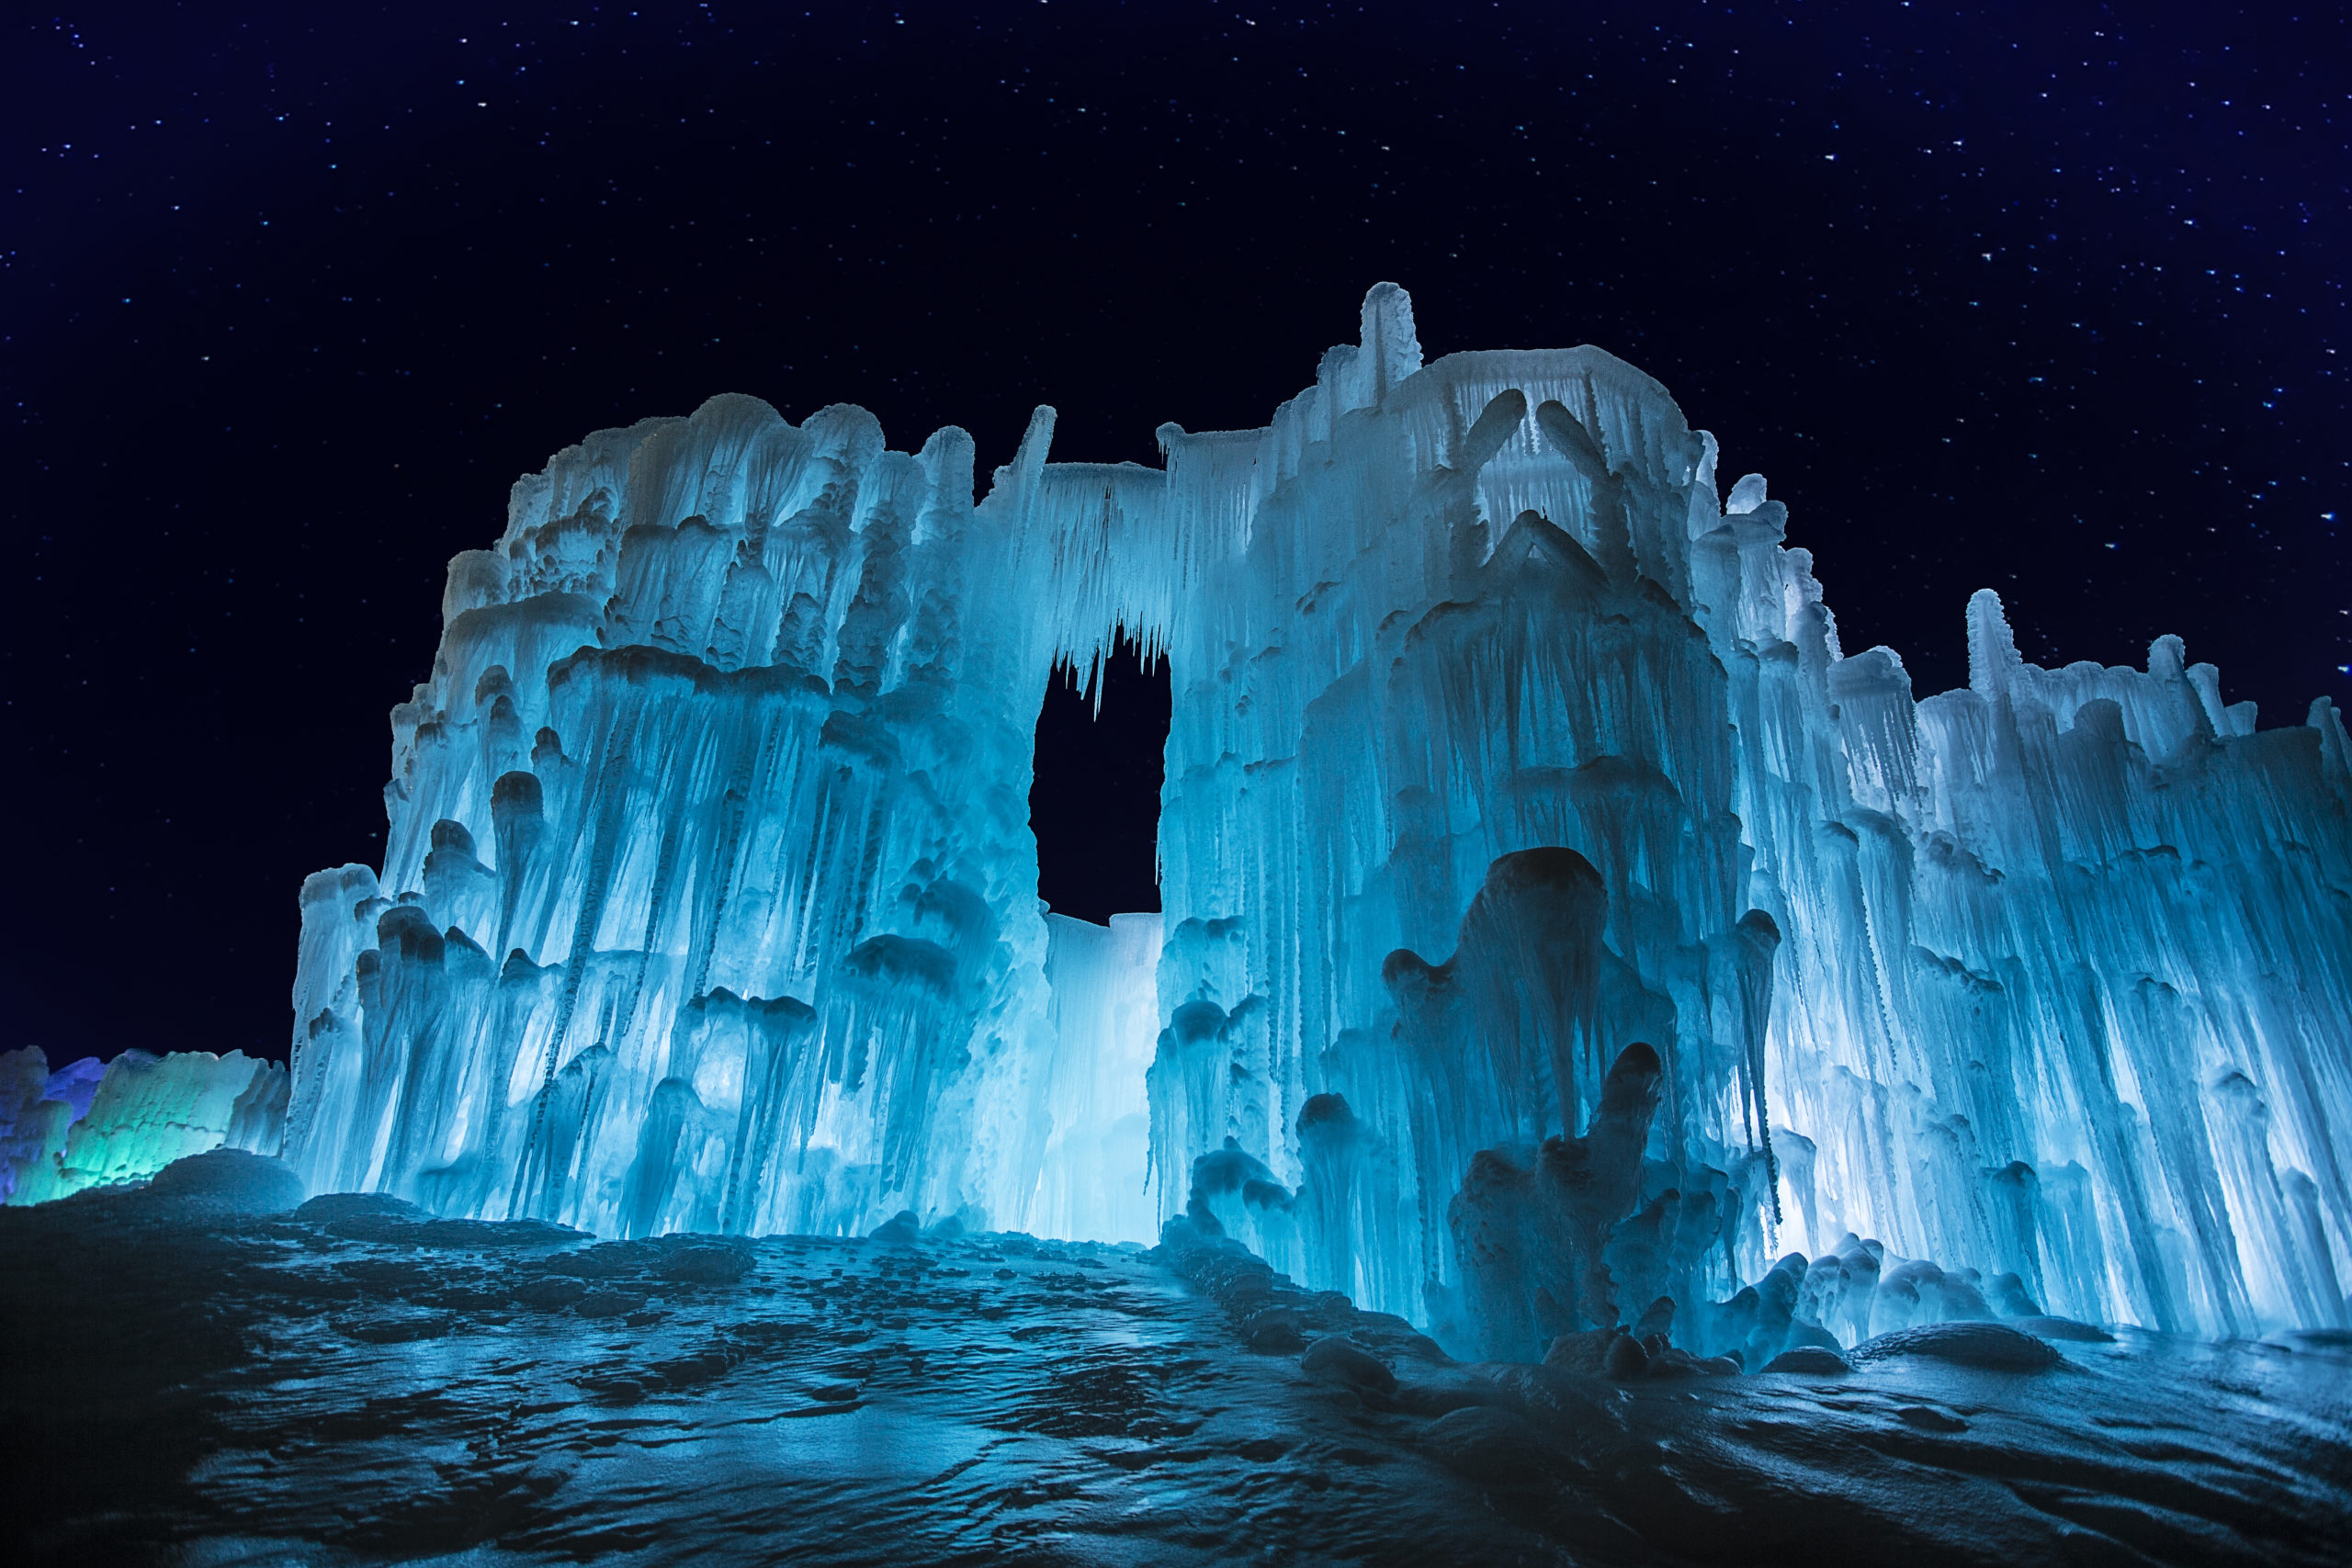 Massive blue ice sculptures with a starry sky....